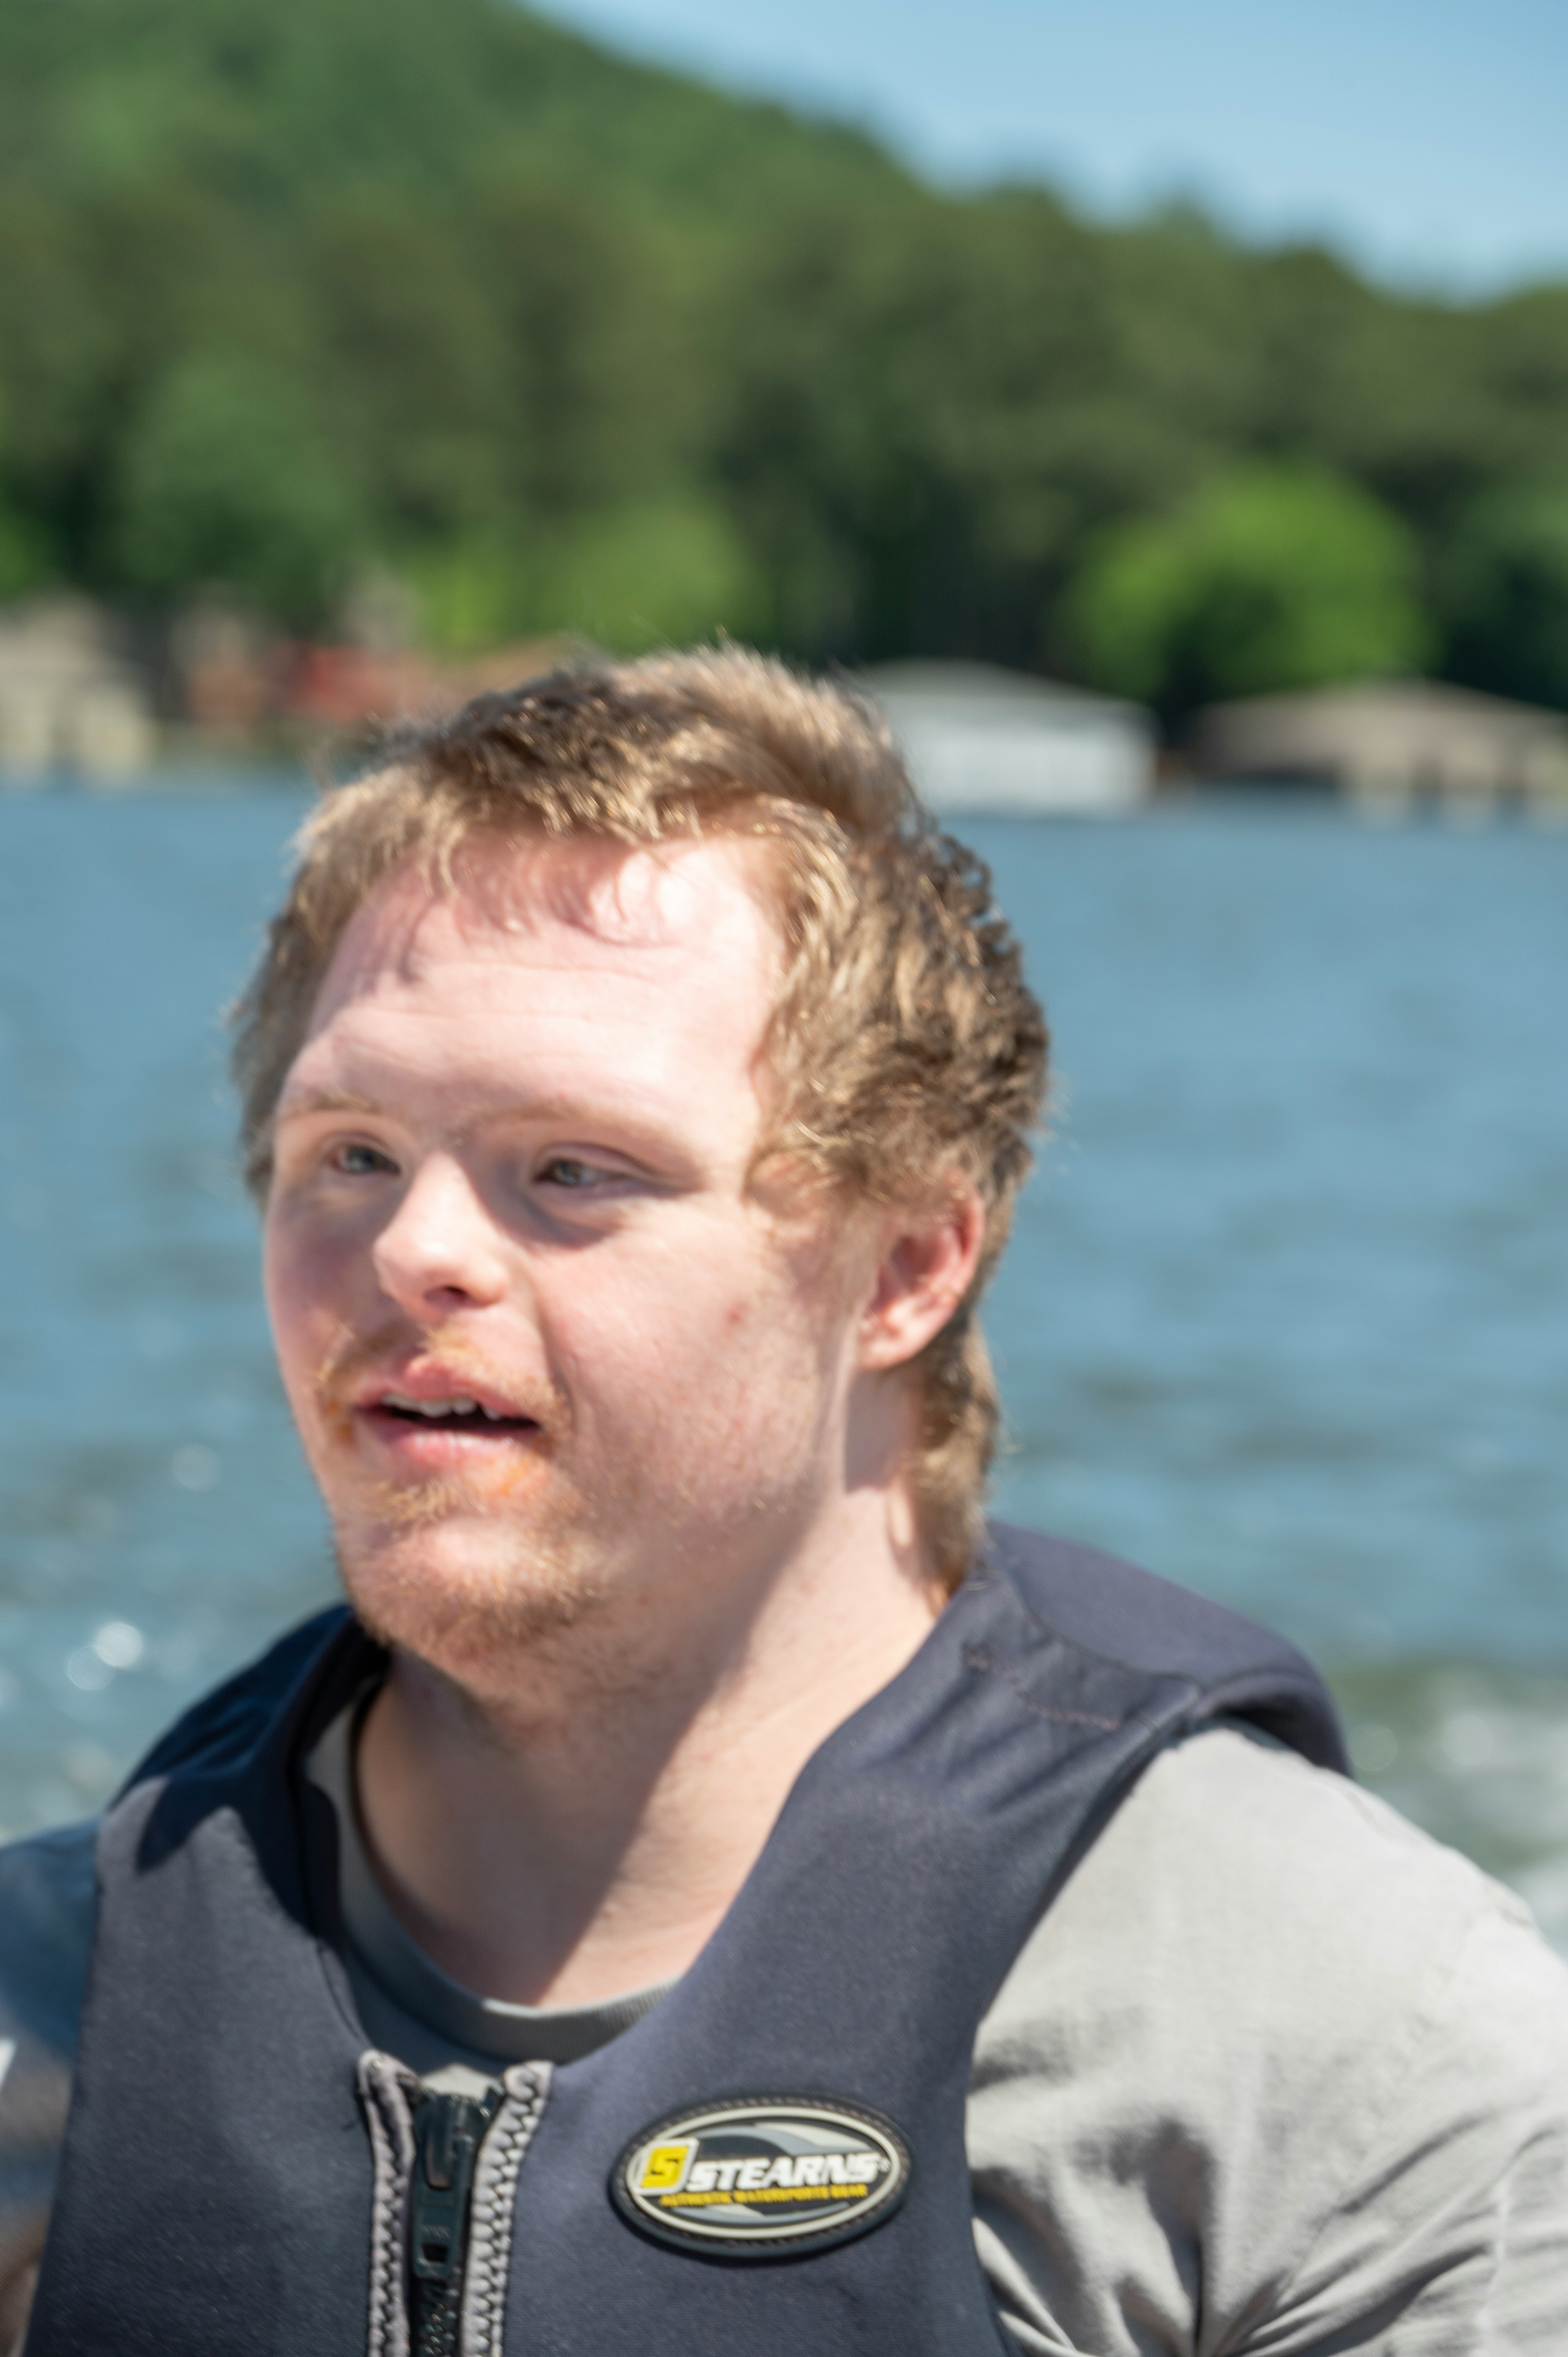 Man with Down syndrome smiling on a boat on a sunny day